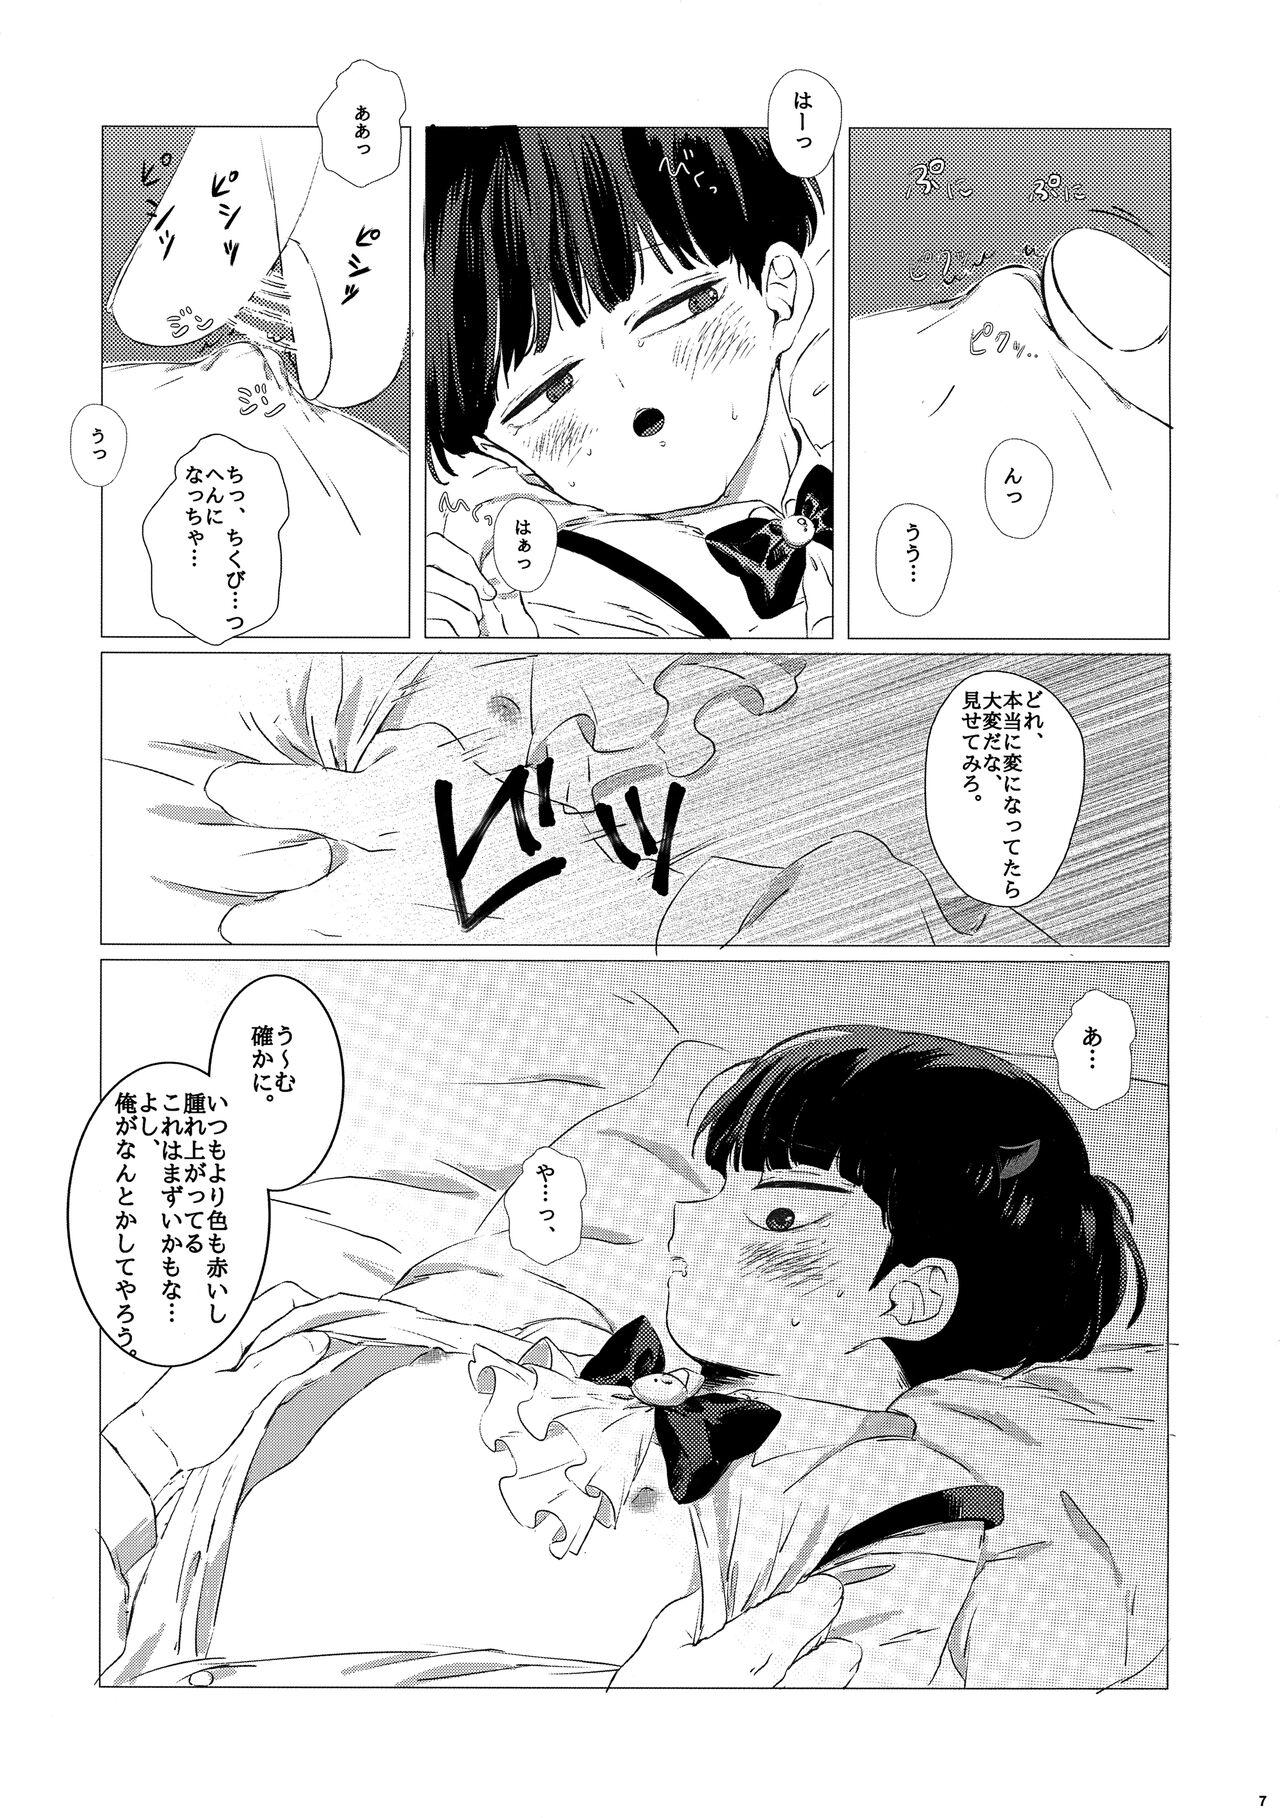 Thong Shiri to Purin to Mob to Ore - Mob psycho 100 Chacal - Page 6